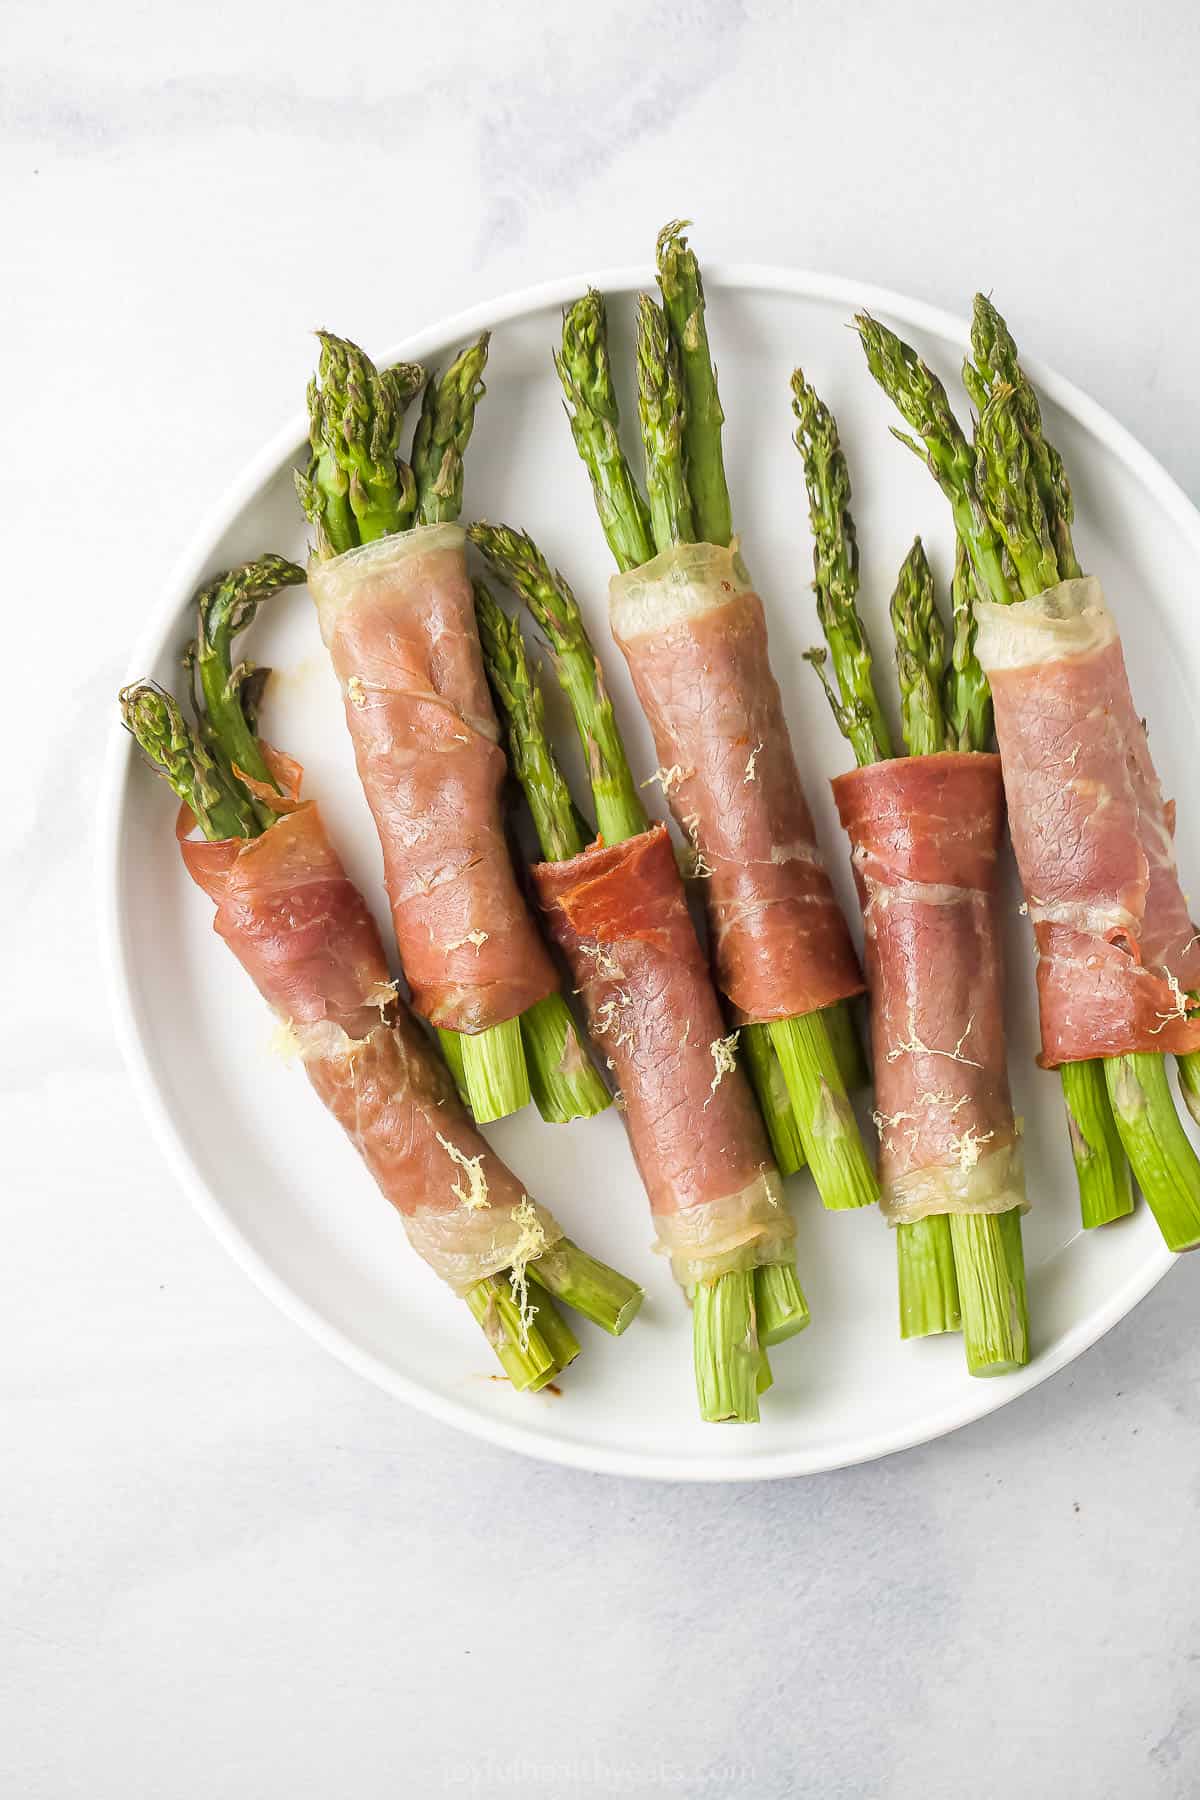 A plate full of prosciutto-wrapped asparagus on a marble kitchen countertop